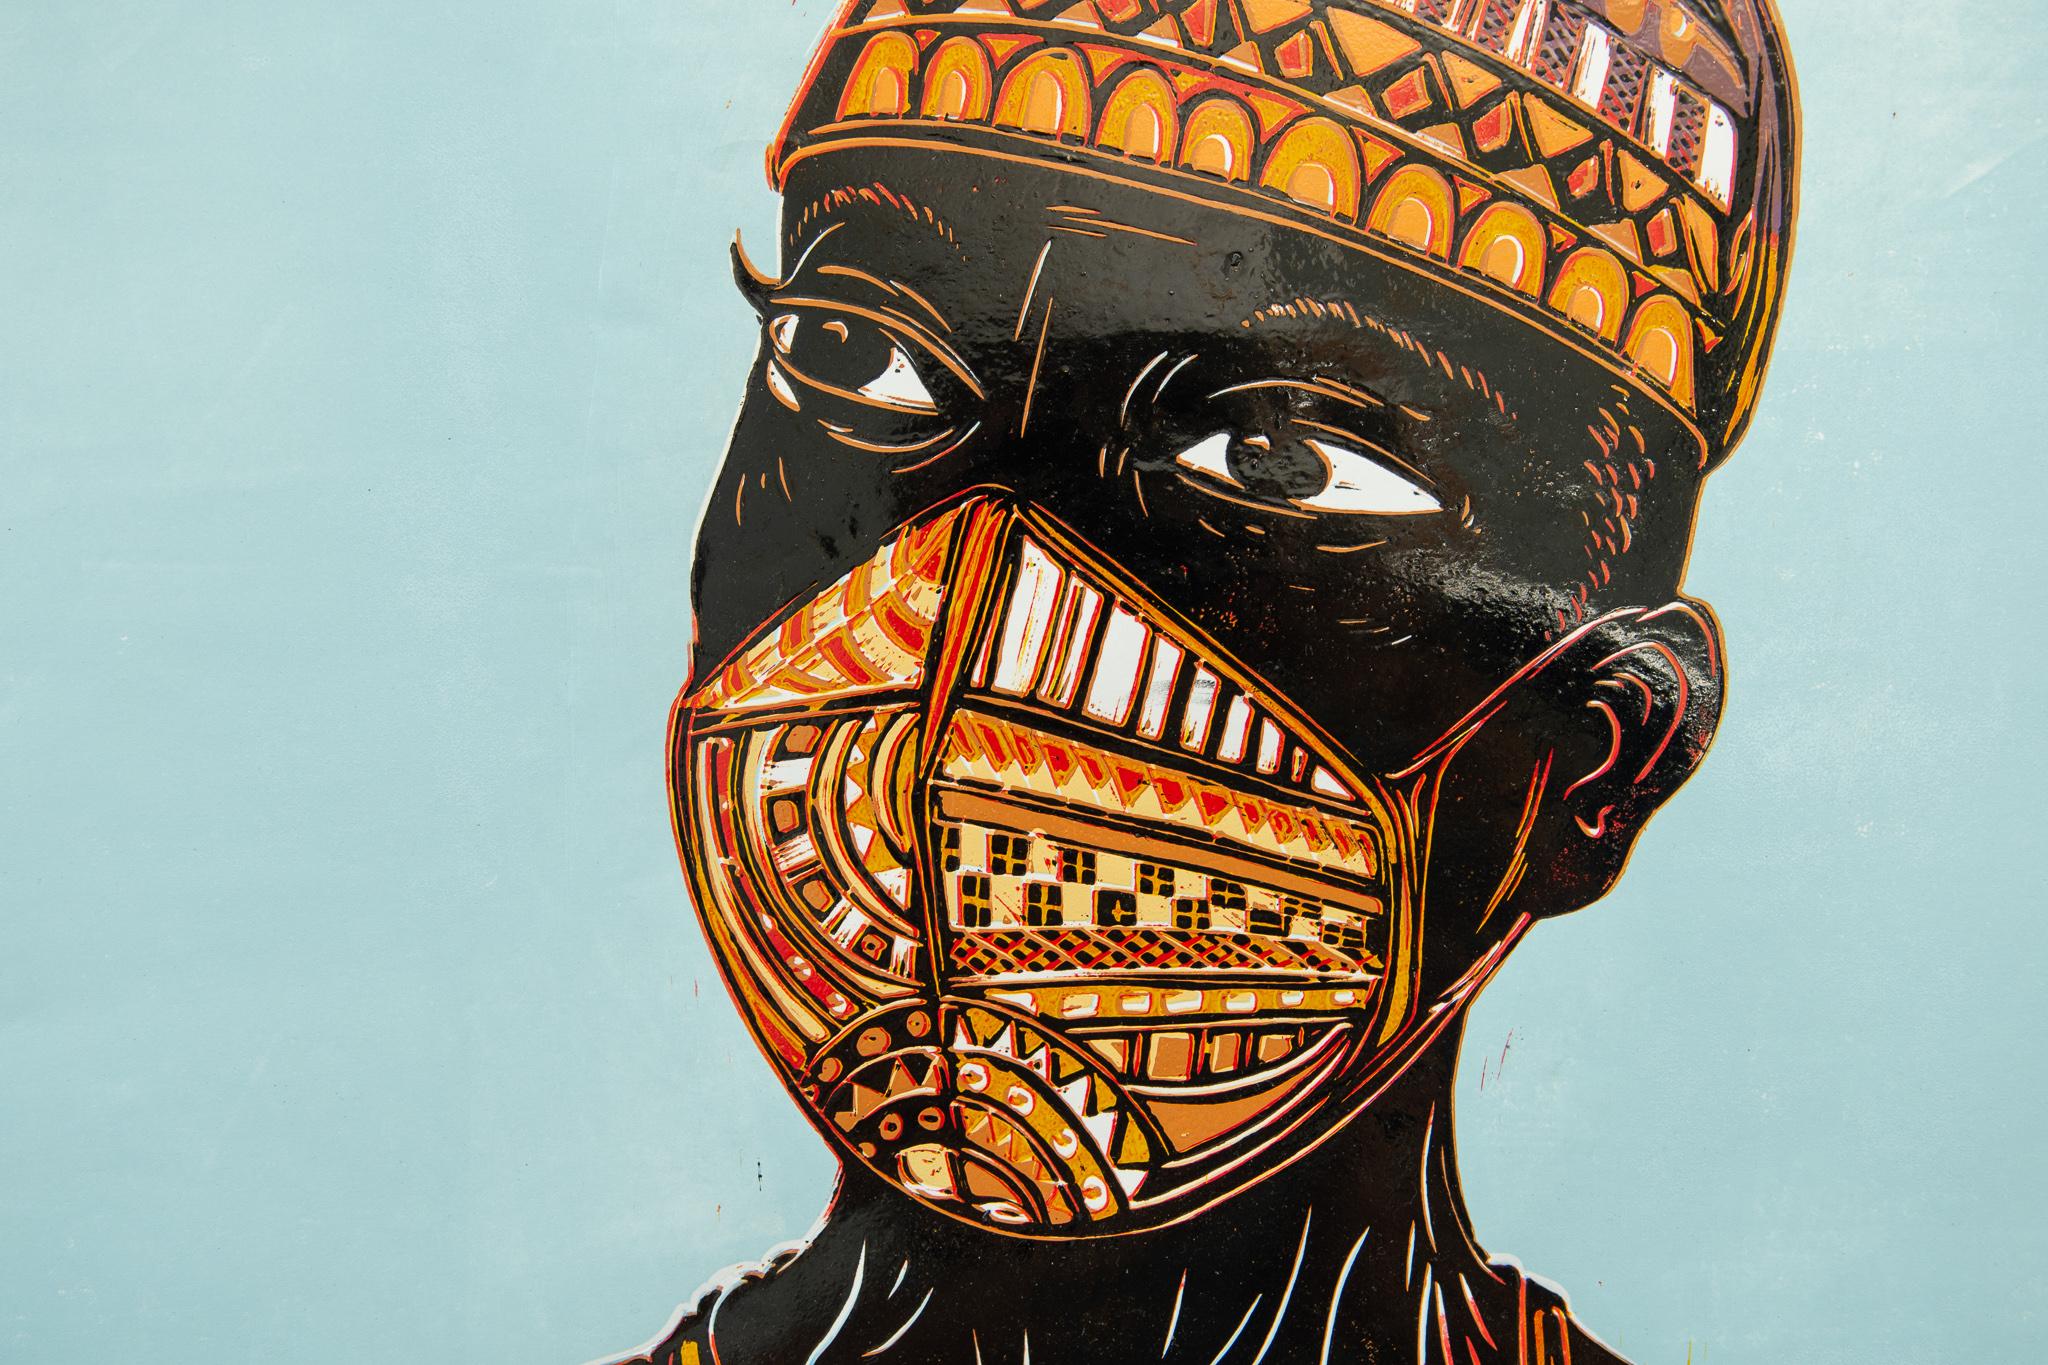 Who's behind the mask II, 2021. Linoleum Block Print on Paper, 1/2

Lok Kandjengo was born in Ongwedieva in 1988. He moved to Windhoek to study visual art, first at the John Muafangejo Art Centre and then at the College of the Arts. Kandjengo